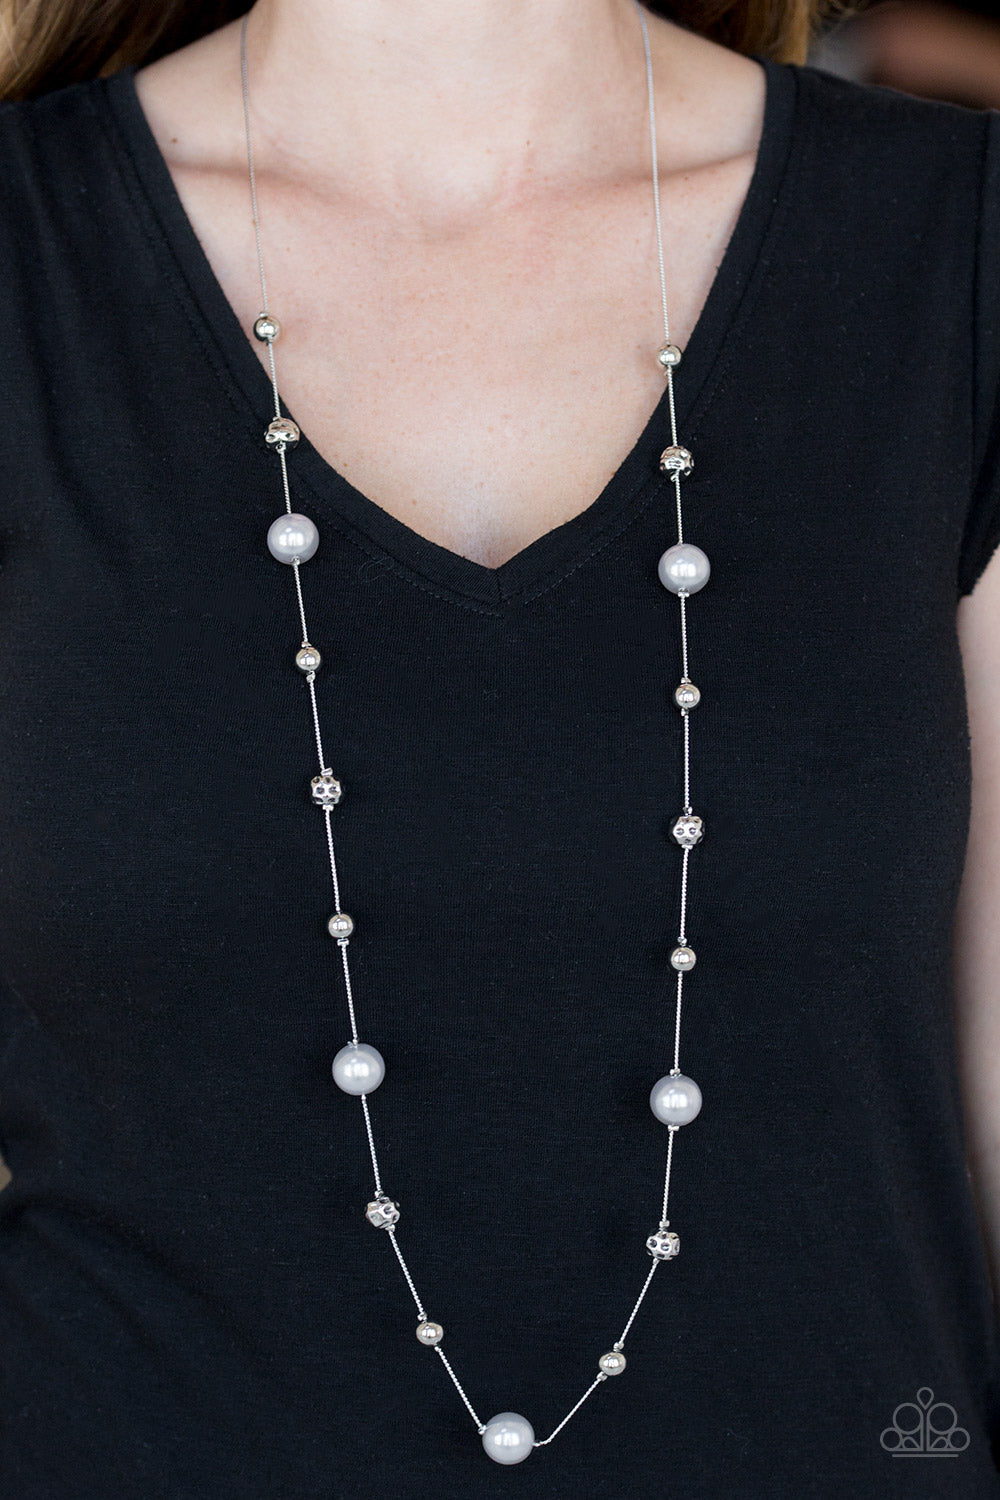 Eloquently Eloquent - Silver Necklace - Paparazzi Accessories